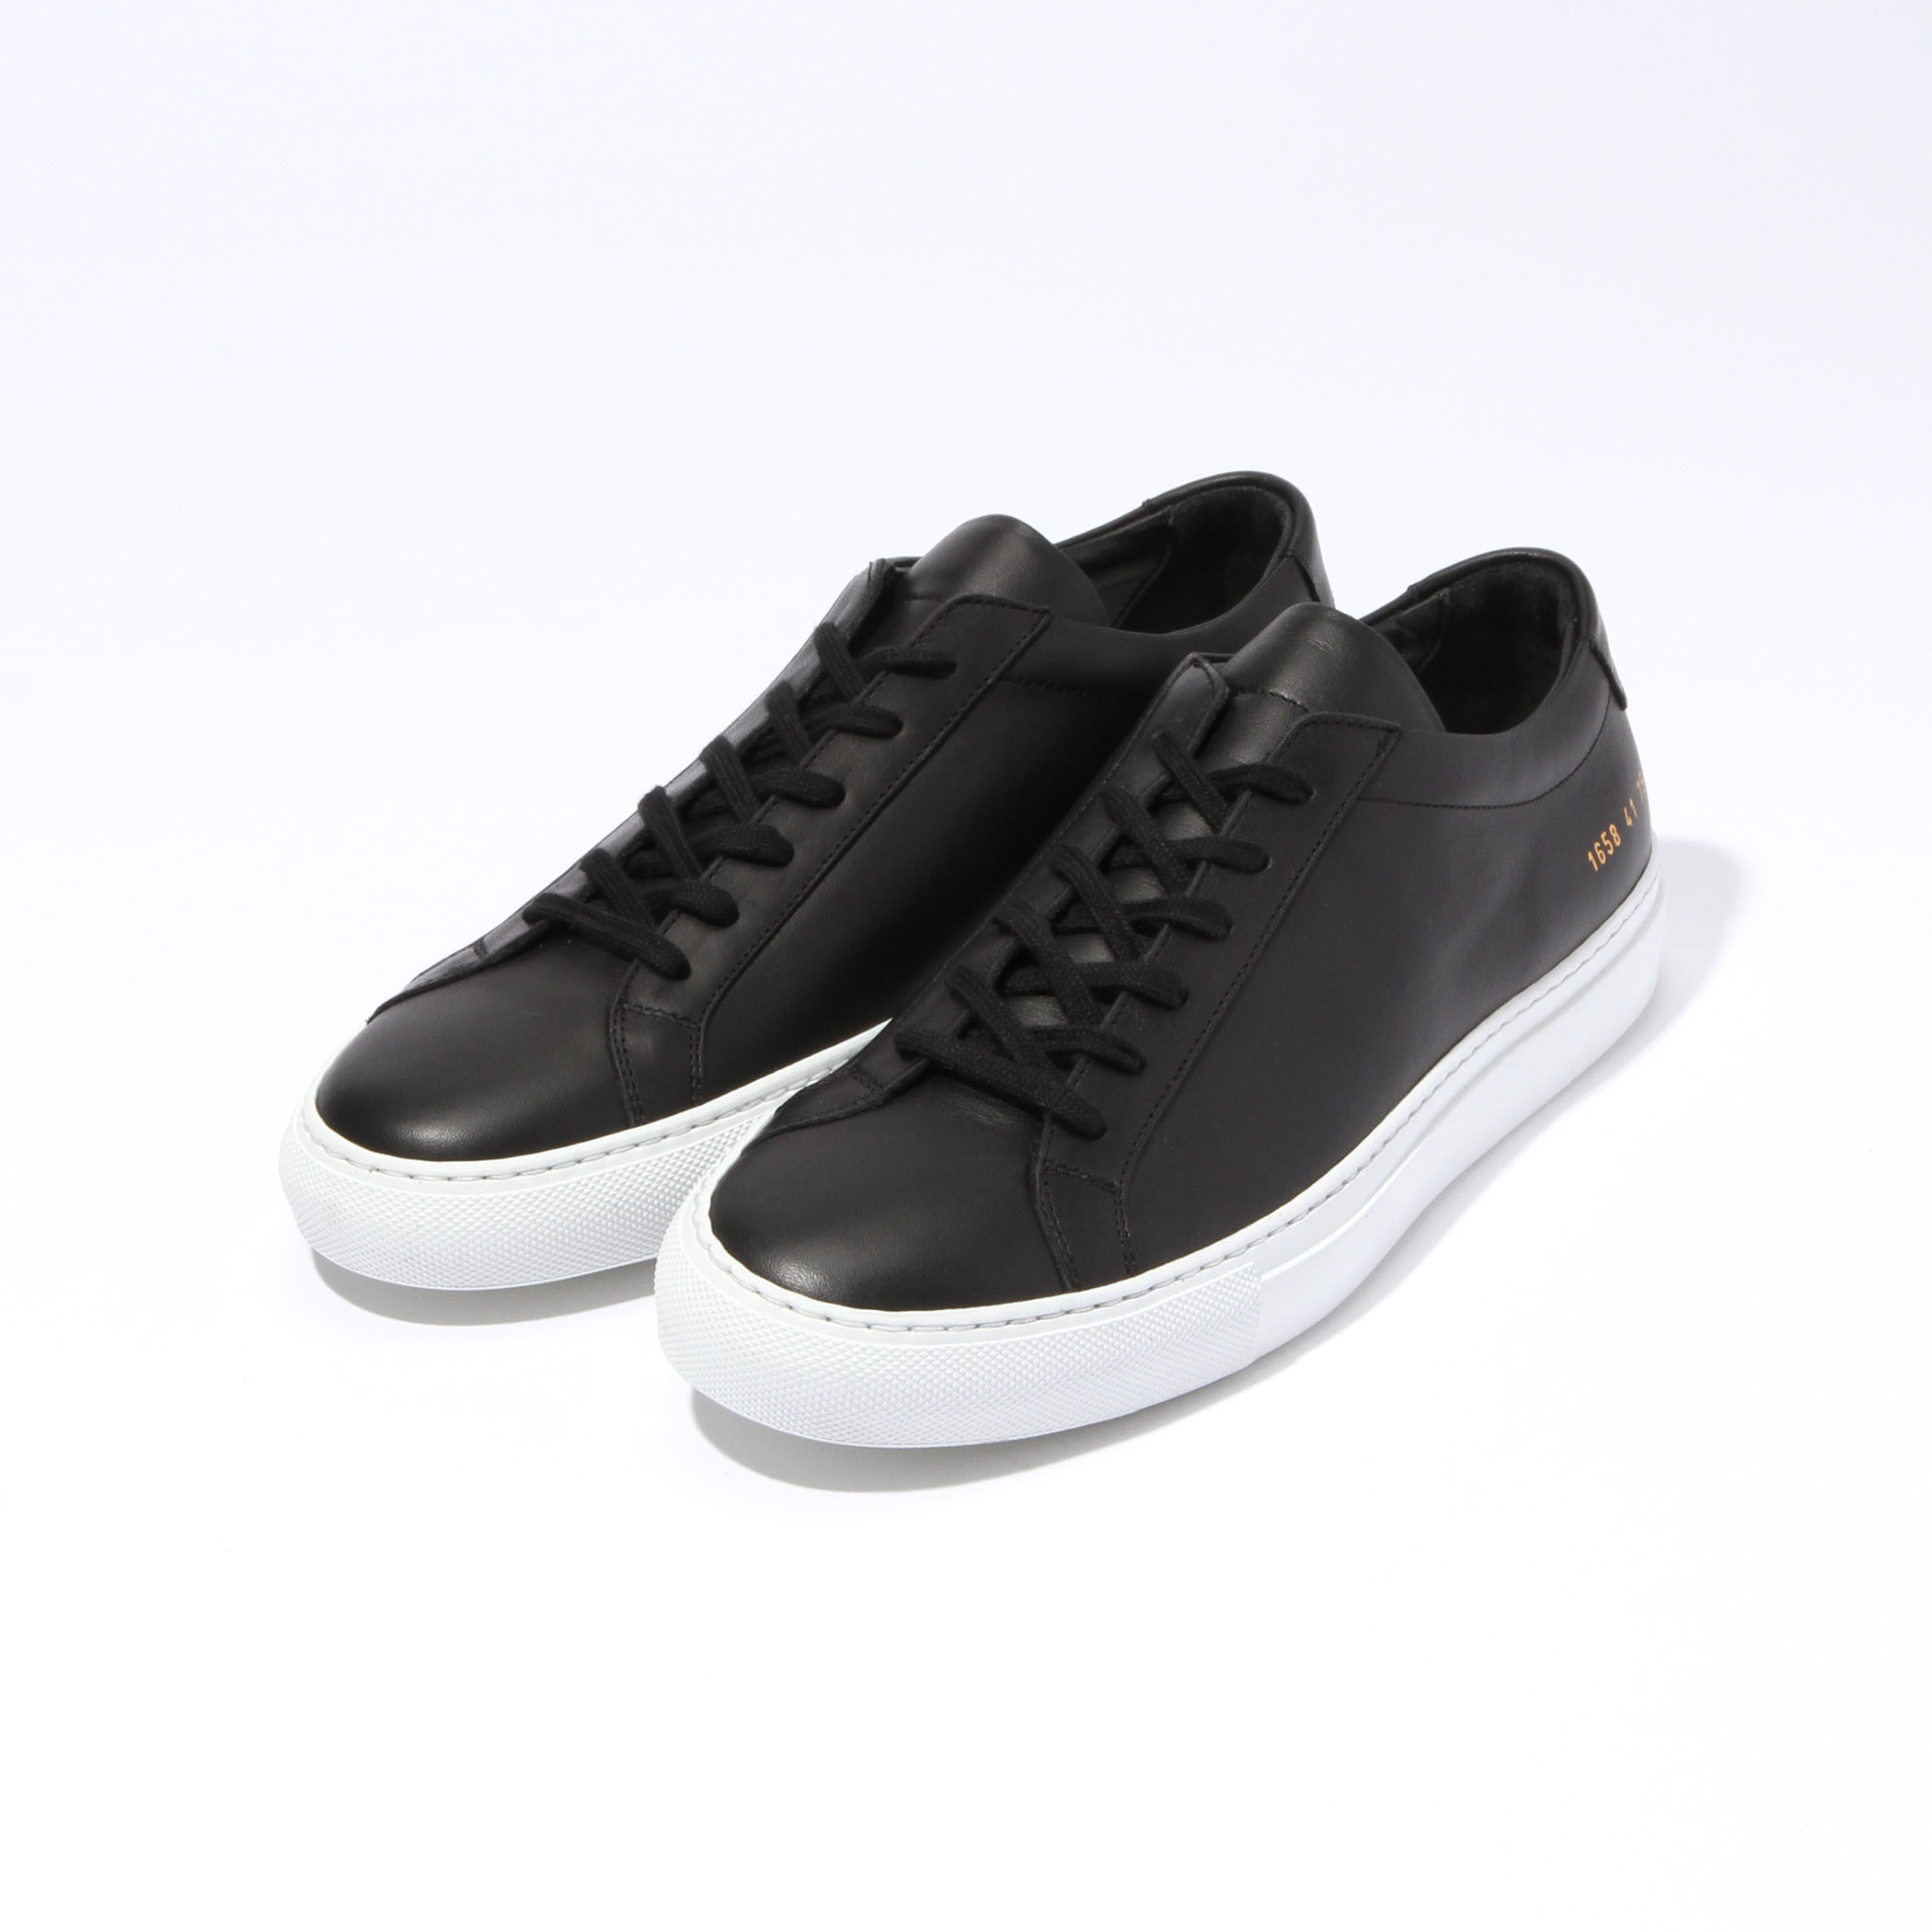 COMMON PROJECTS Achilles Low スニーカー箱と替えの靴紐もあります